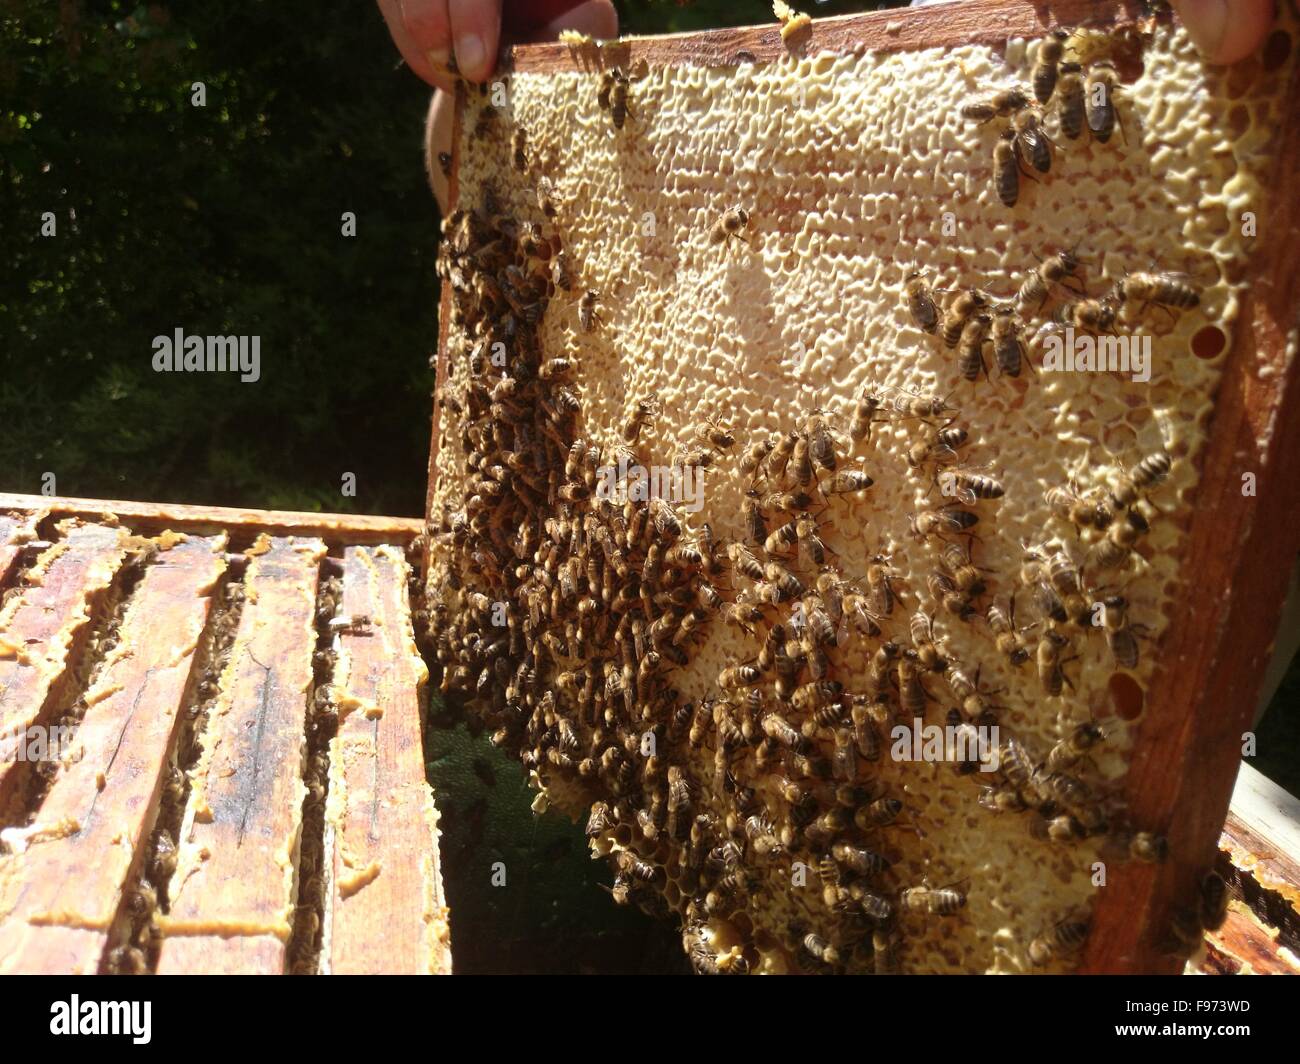 Beekeeper Maintaining Artificial Beehive Stock Photo